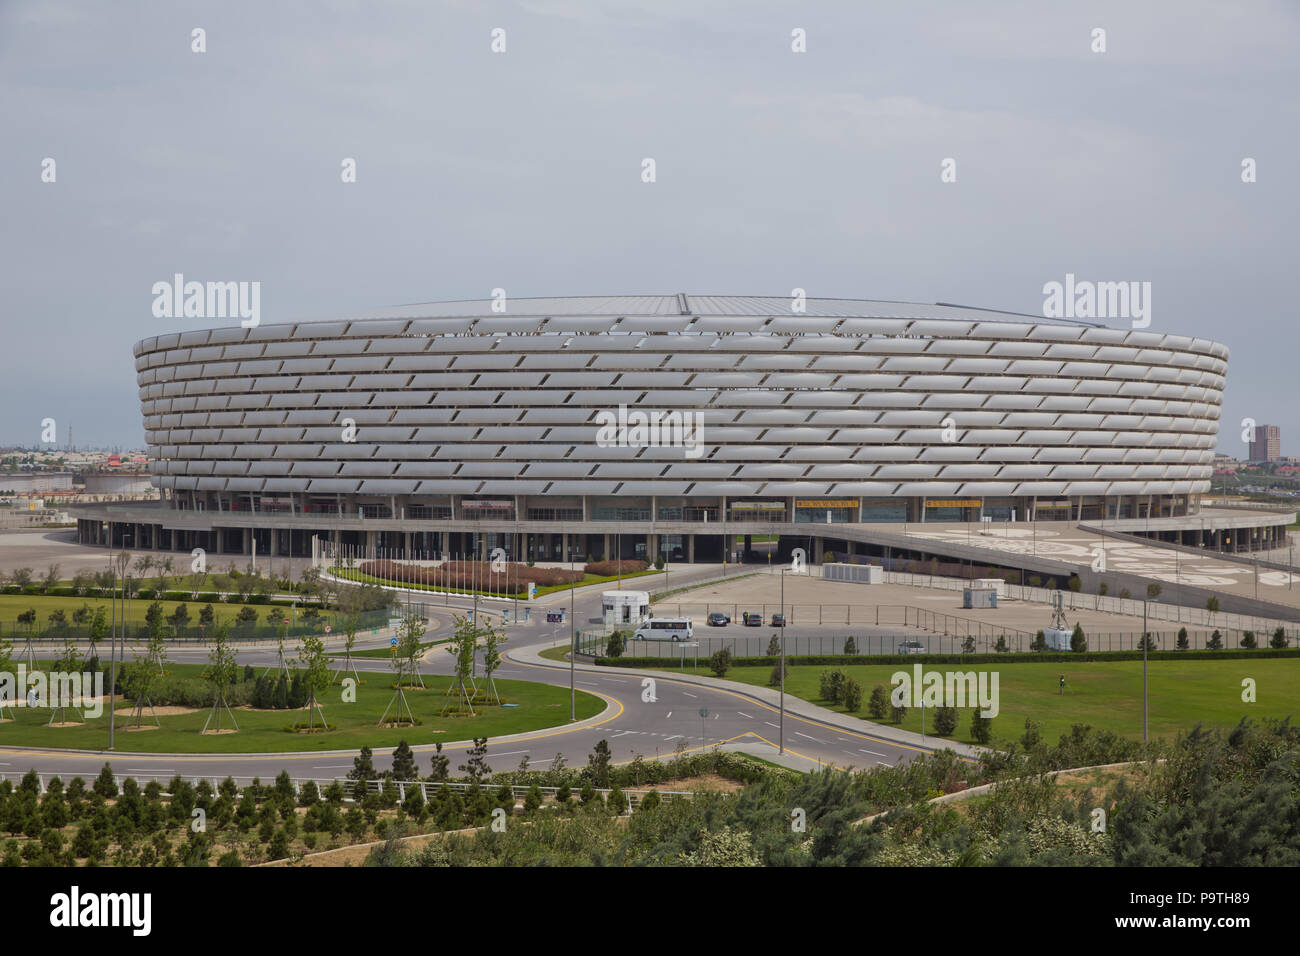 Construction of the 225,000-square-meter Stadium on a 650,000-square-meter site was completed in February 2015. The six-story, 65.7 meter structure ne Stock Photo